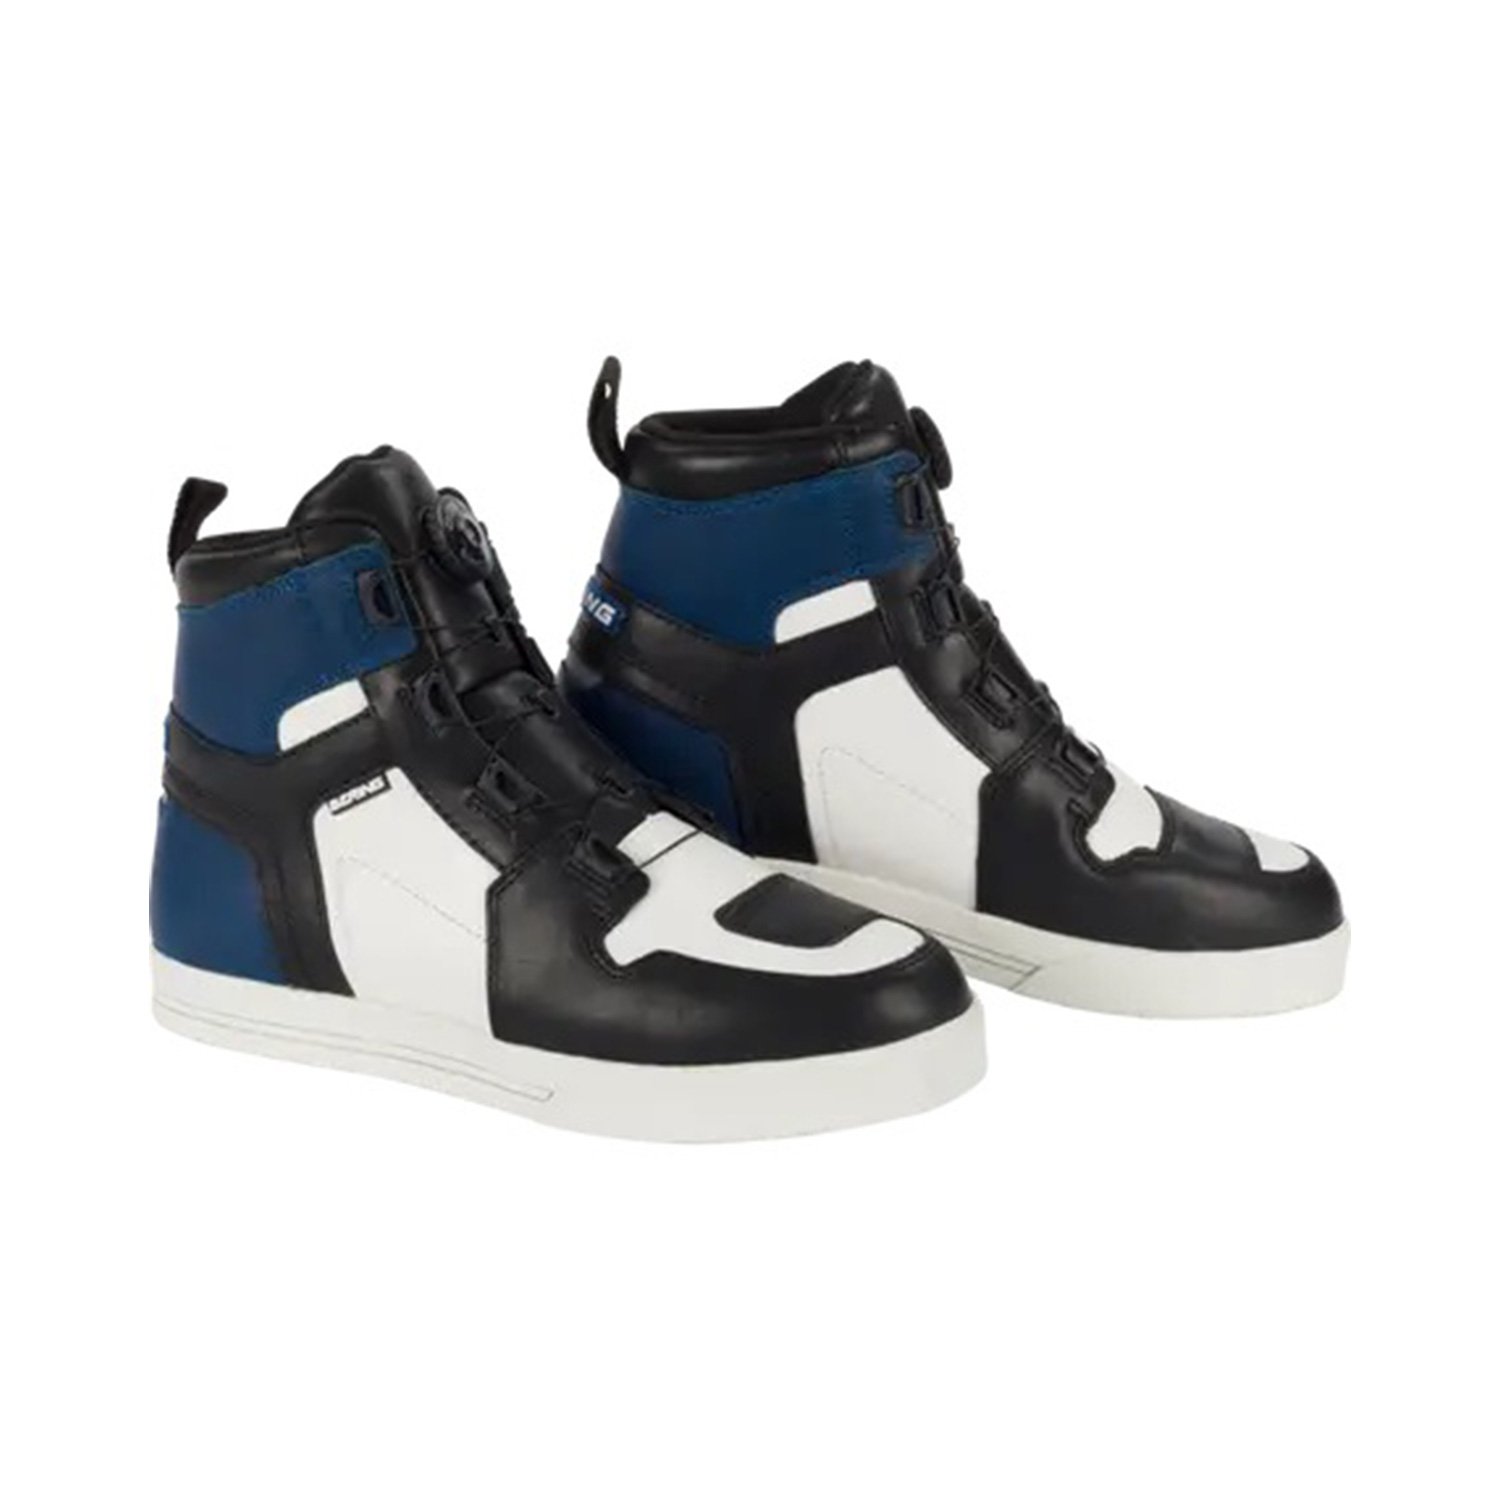 Image of Bering Sneakers Reflex A-Top Black White Blue Size 43 ID 3660815176771